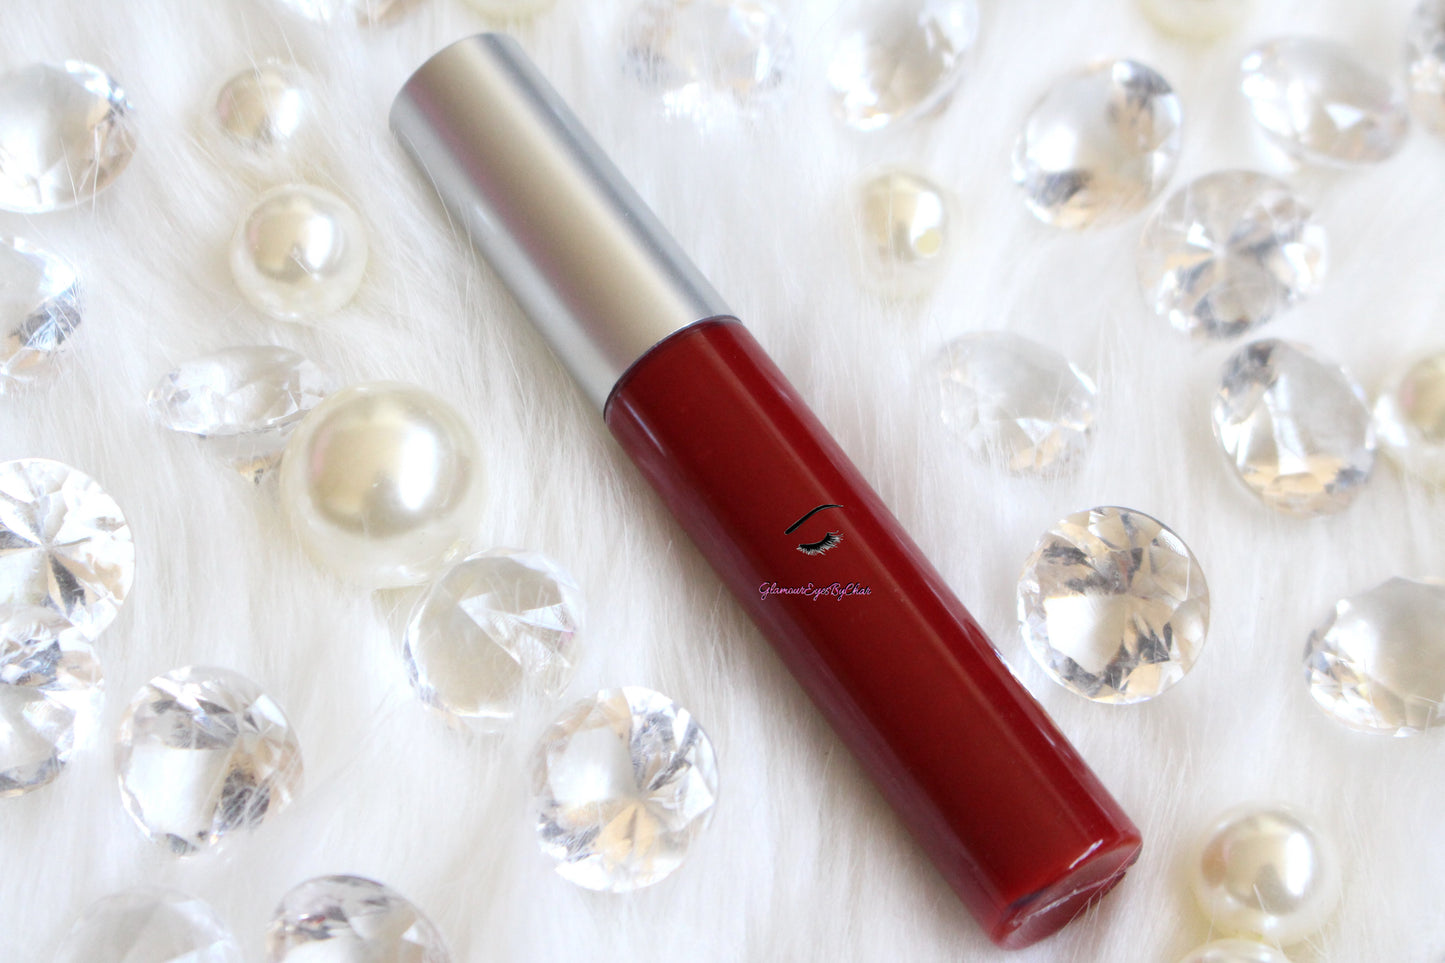 Red Pumps is a ruby red hydrating gloss. This gloss is also vegan, gluten-free, high shine, smooth and long lasting. It's made with premium rich ingredients to keep your lips soft, moisturized and luscious without feeling sticky. Red Pumps is available in a squeeze tube and a wand tube (doe foot applicator) for a more precise application.